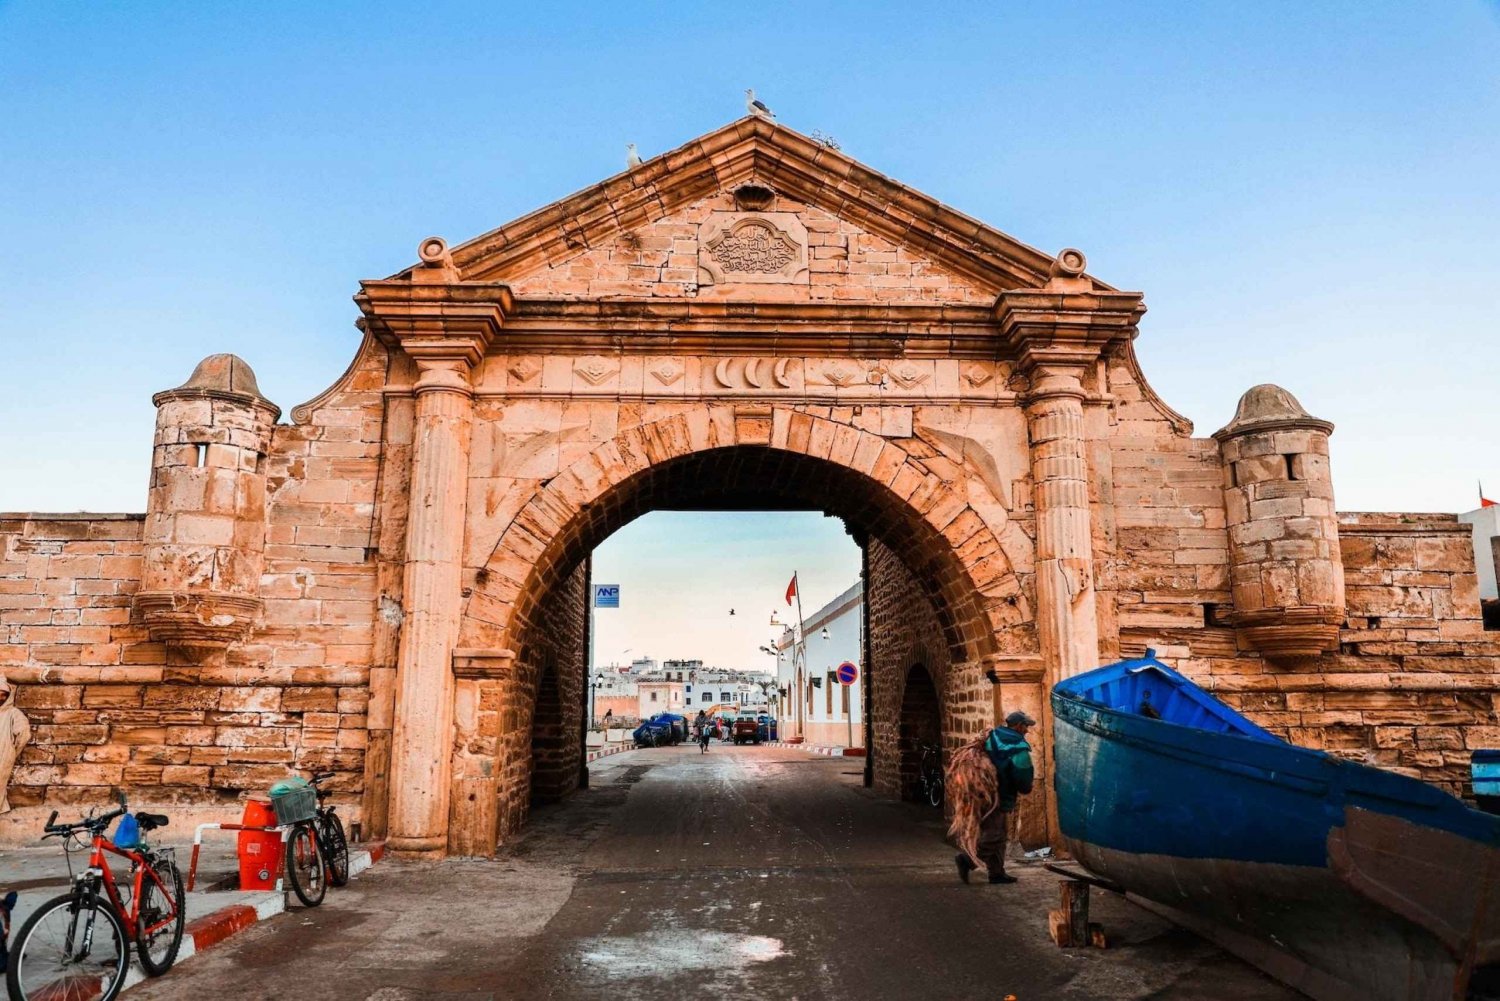 From Marrakech: Guided tour of Essaouira the coastal city